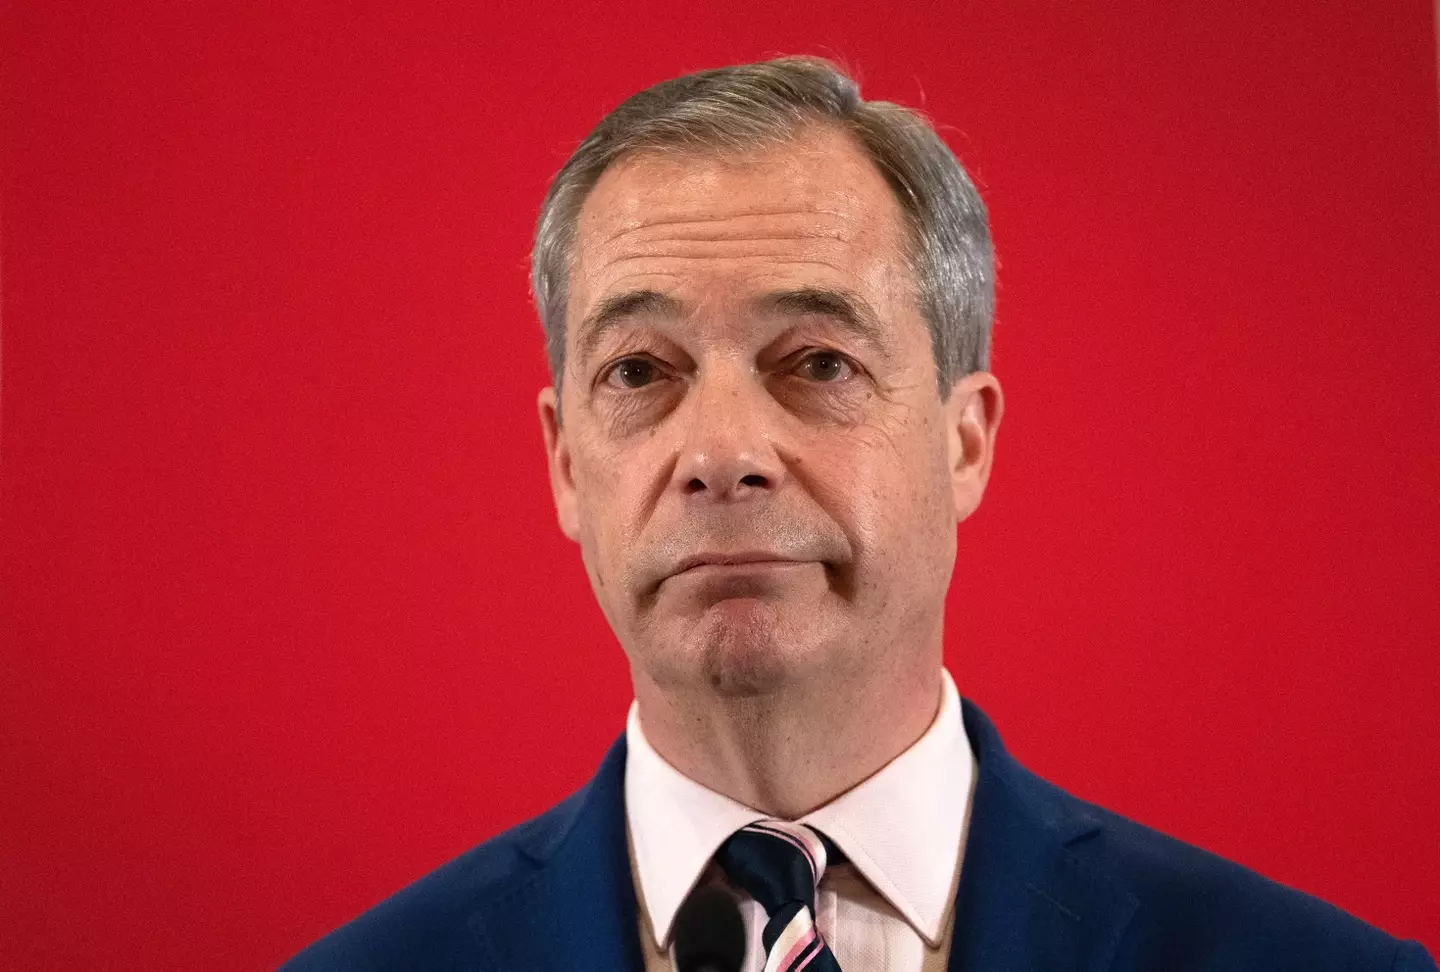 Nigel Farage will be joining the show.